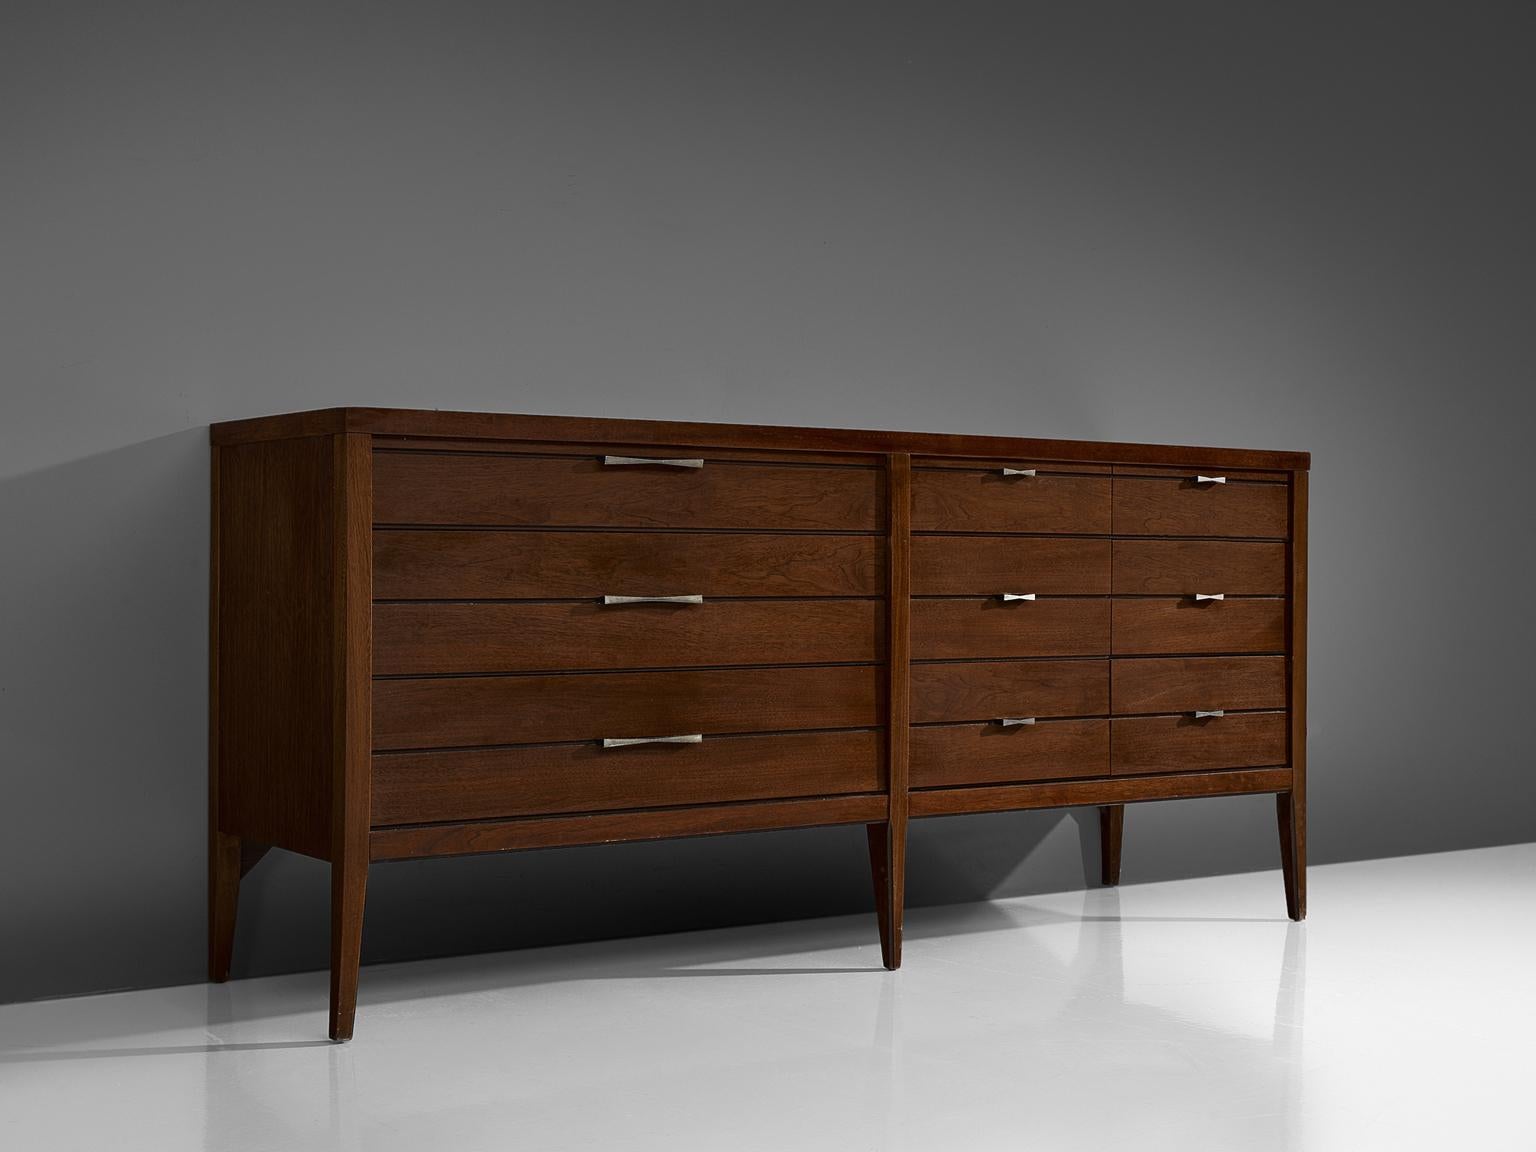 Sideboard, walnut, rosewood and metal, United States, 1950s.

This credenza features strong traits of the functional and modest furniture line of Paul McCobb. The piece features nine butterfly handles and beautiful matching butterfly joints on the